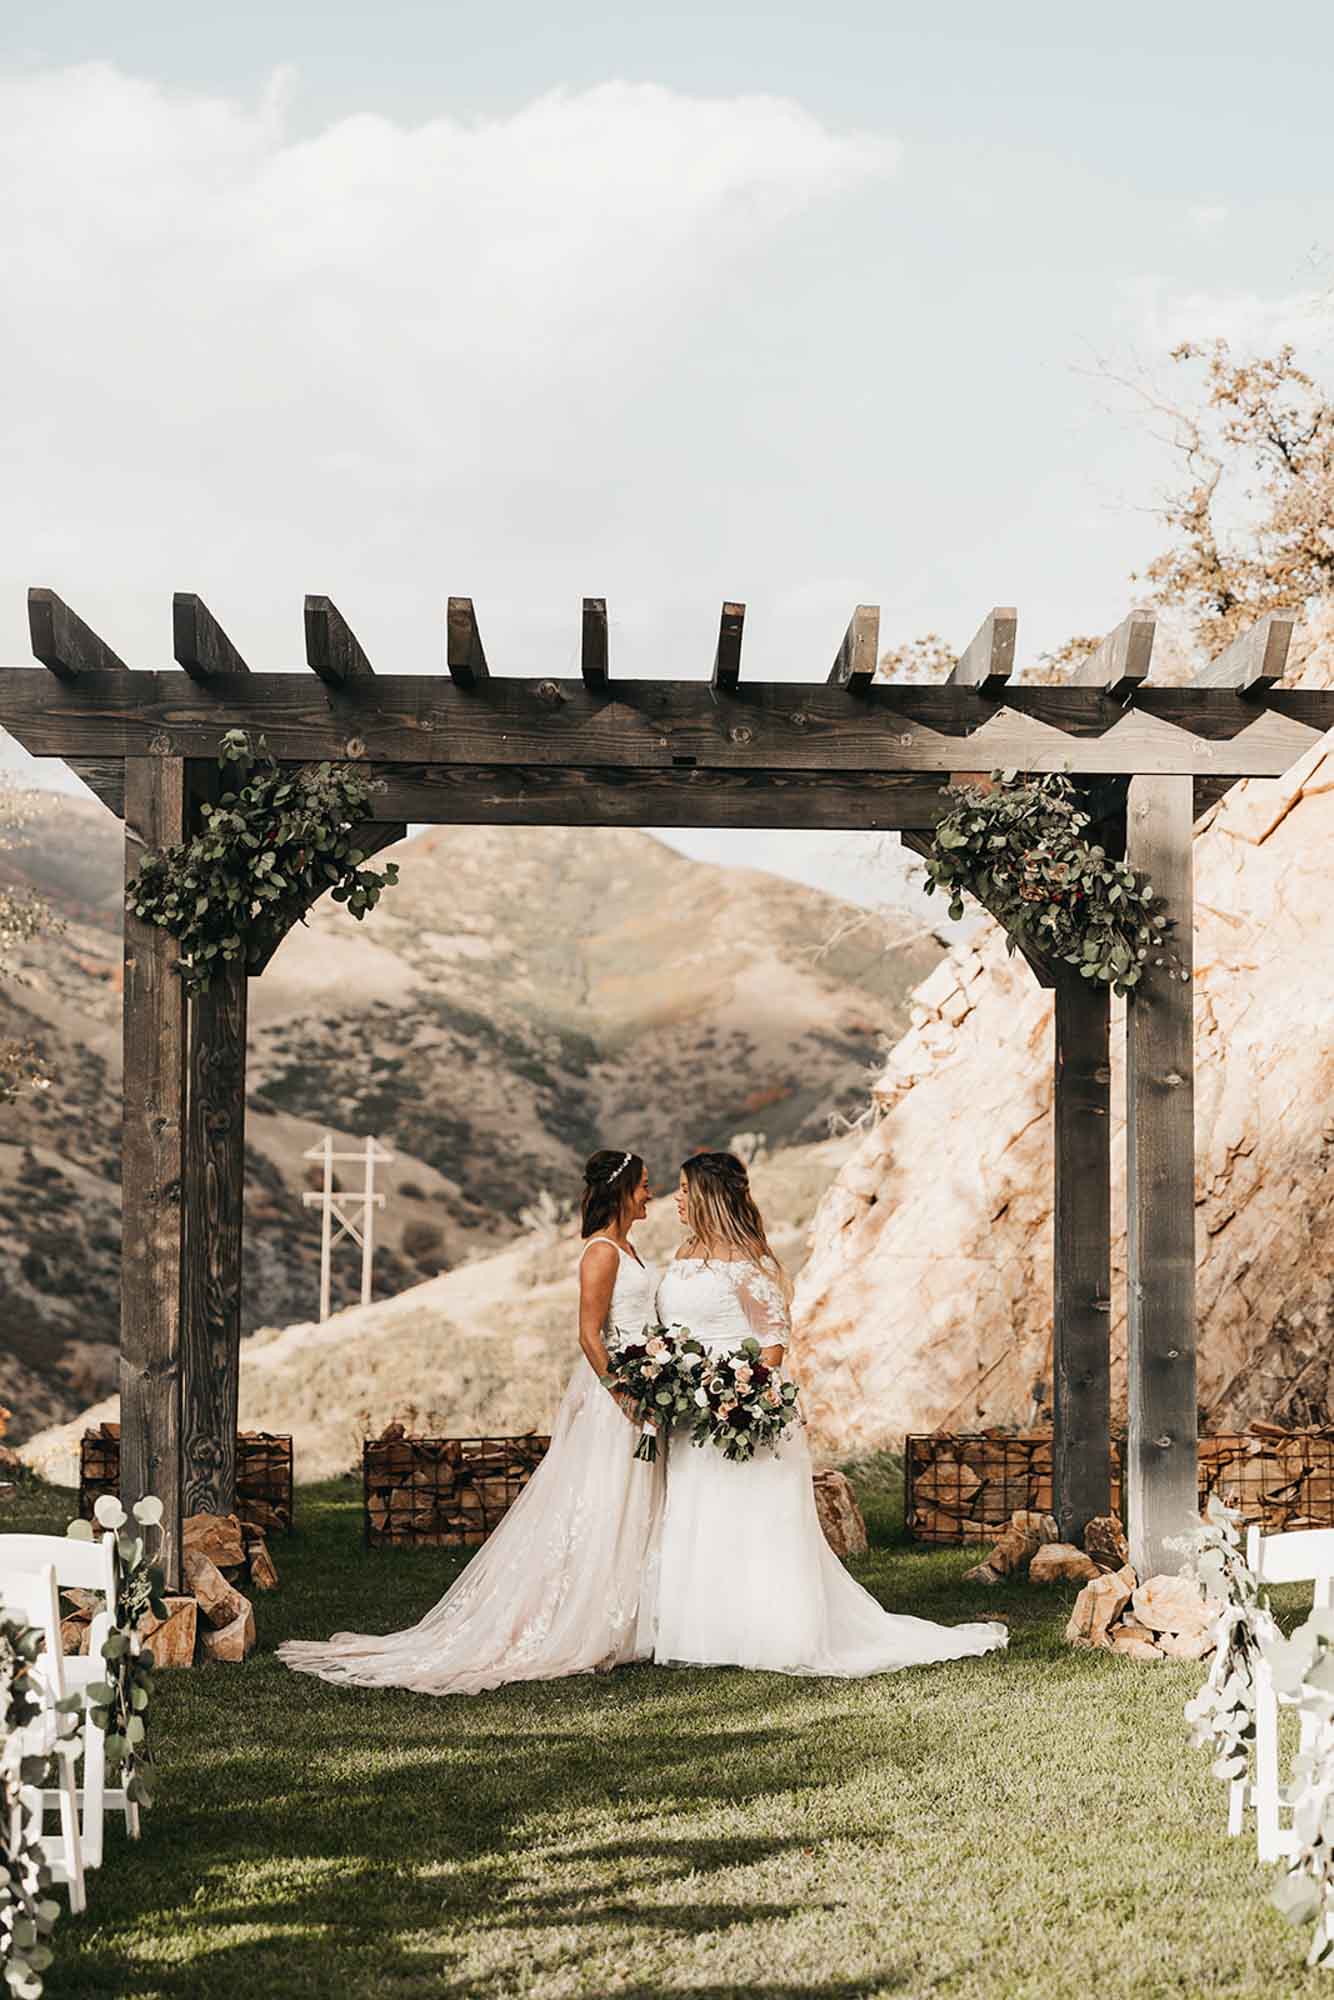 Autumn wedding in the Utah mountains | Terra Ong Photography | Featured on Equally Wed, the leading LGBTQ+ wedding magazine